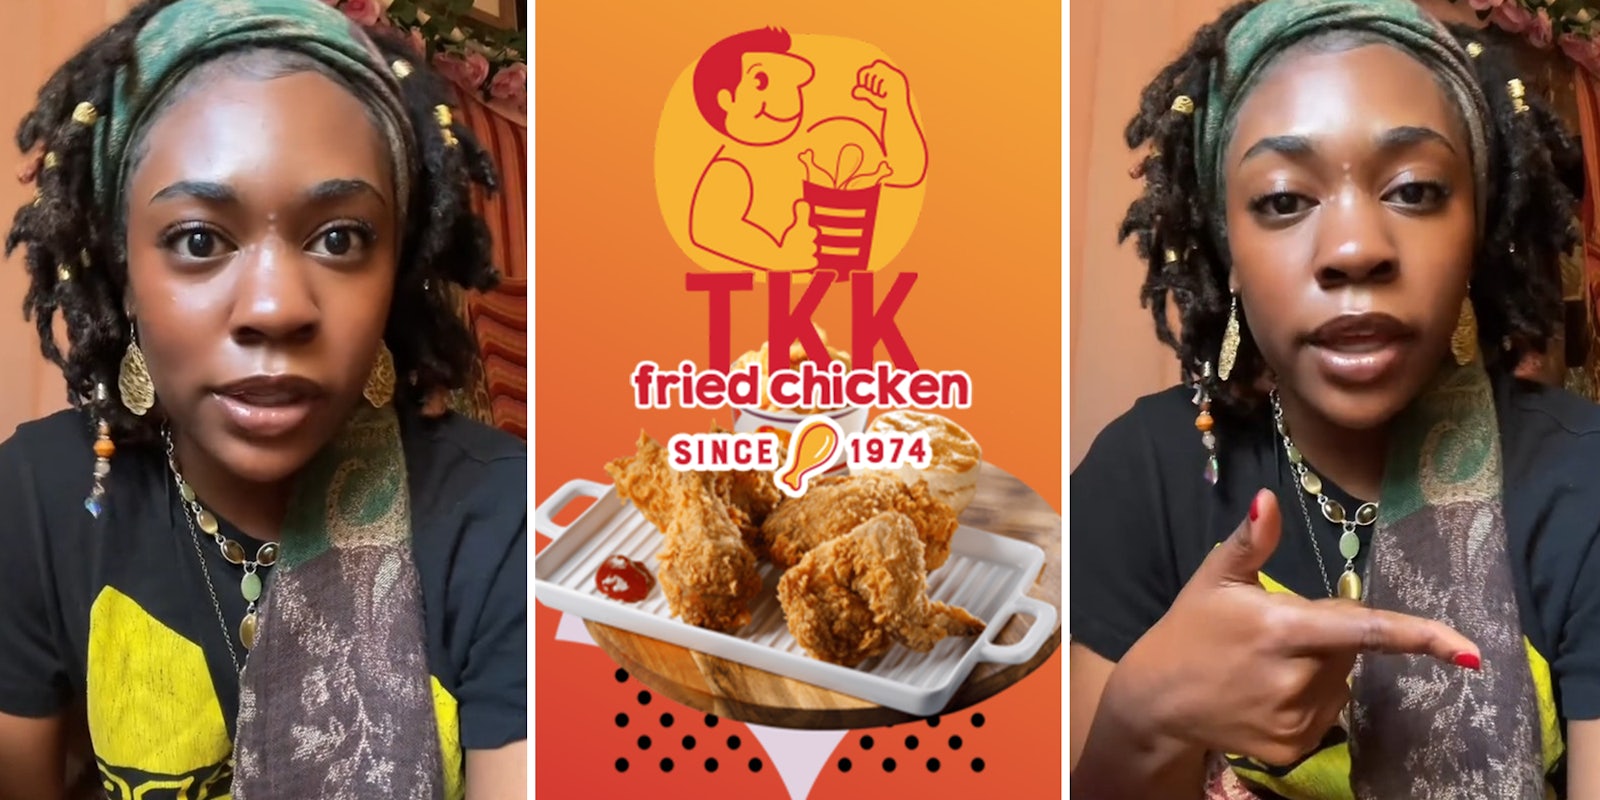 Customer says TKK Fried Chicken charged her $4 more than her friend for the exact same meal